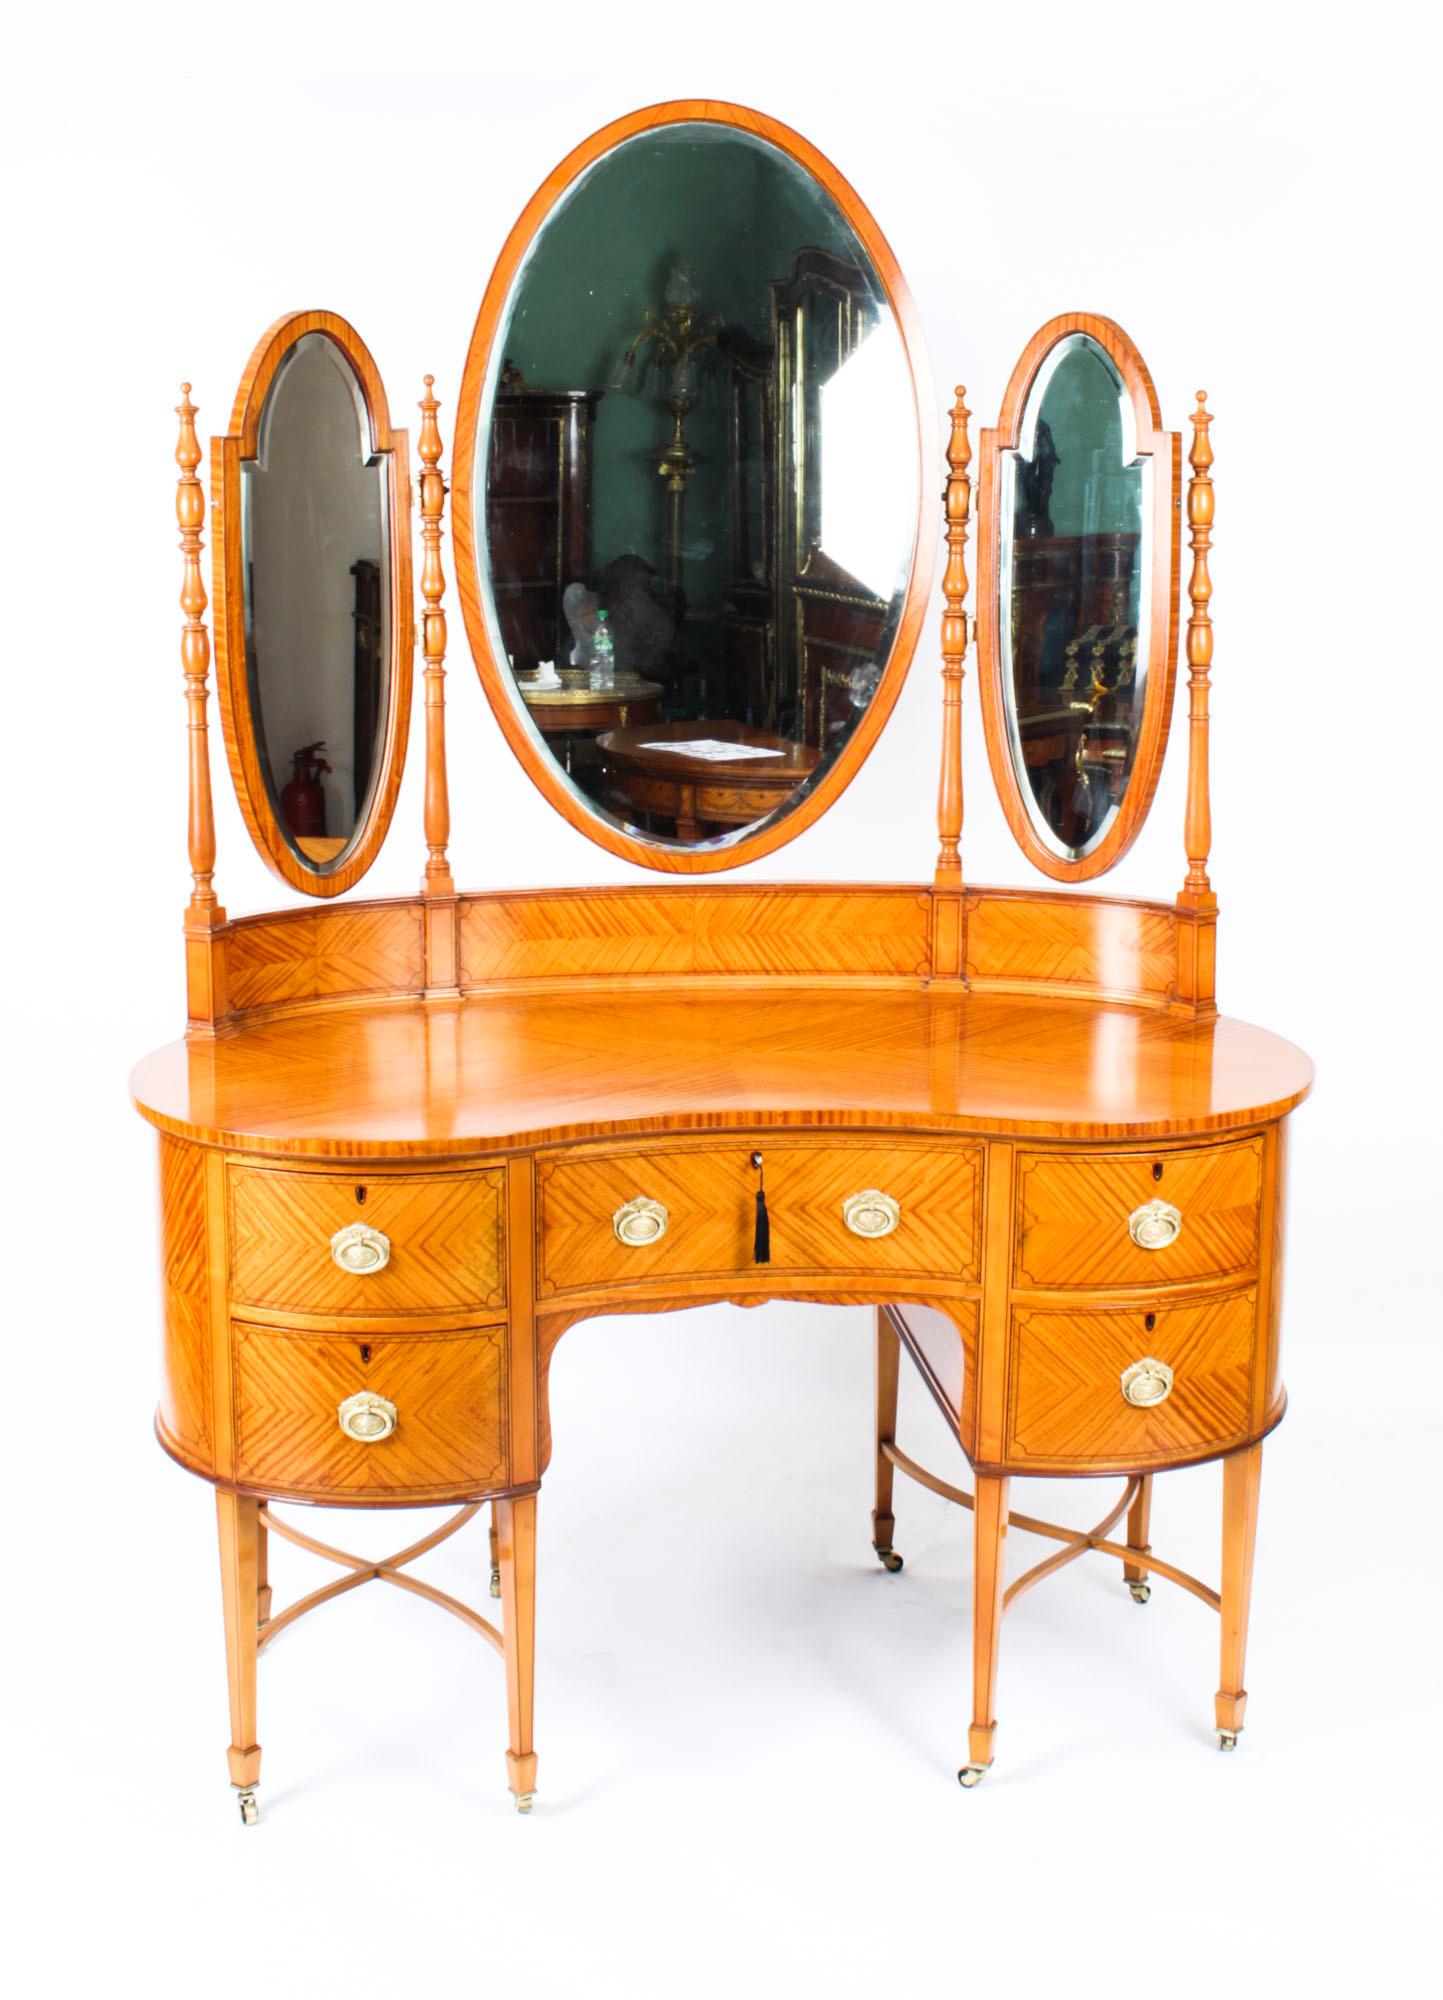 This is a totally fabulous antique satinwood kidney shaped dressing table with ebonised inlay, attributed to Maple & Co, circa 1880 in date.

The stunning satinwood with ebonized line inlay and crossbanding. It has a useful central drawer, a pair